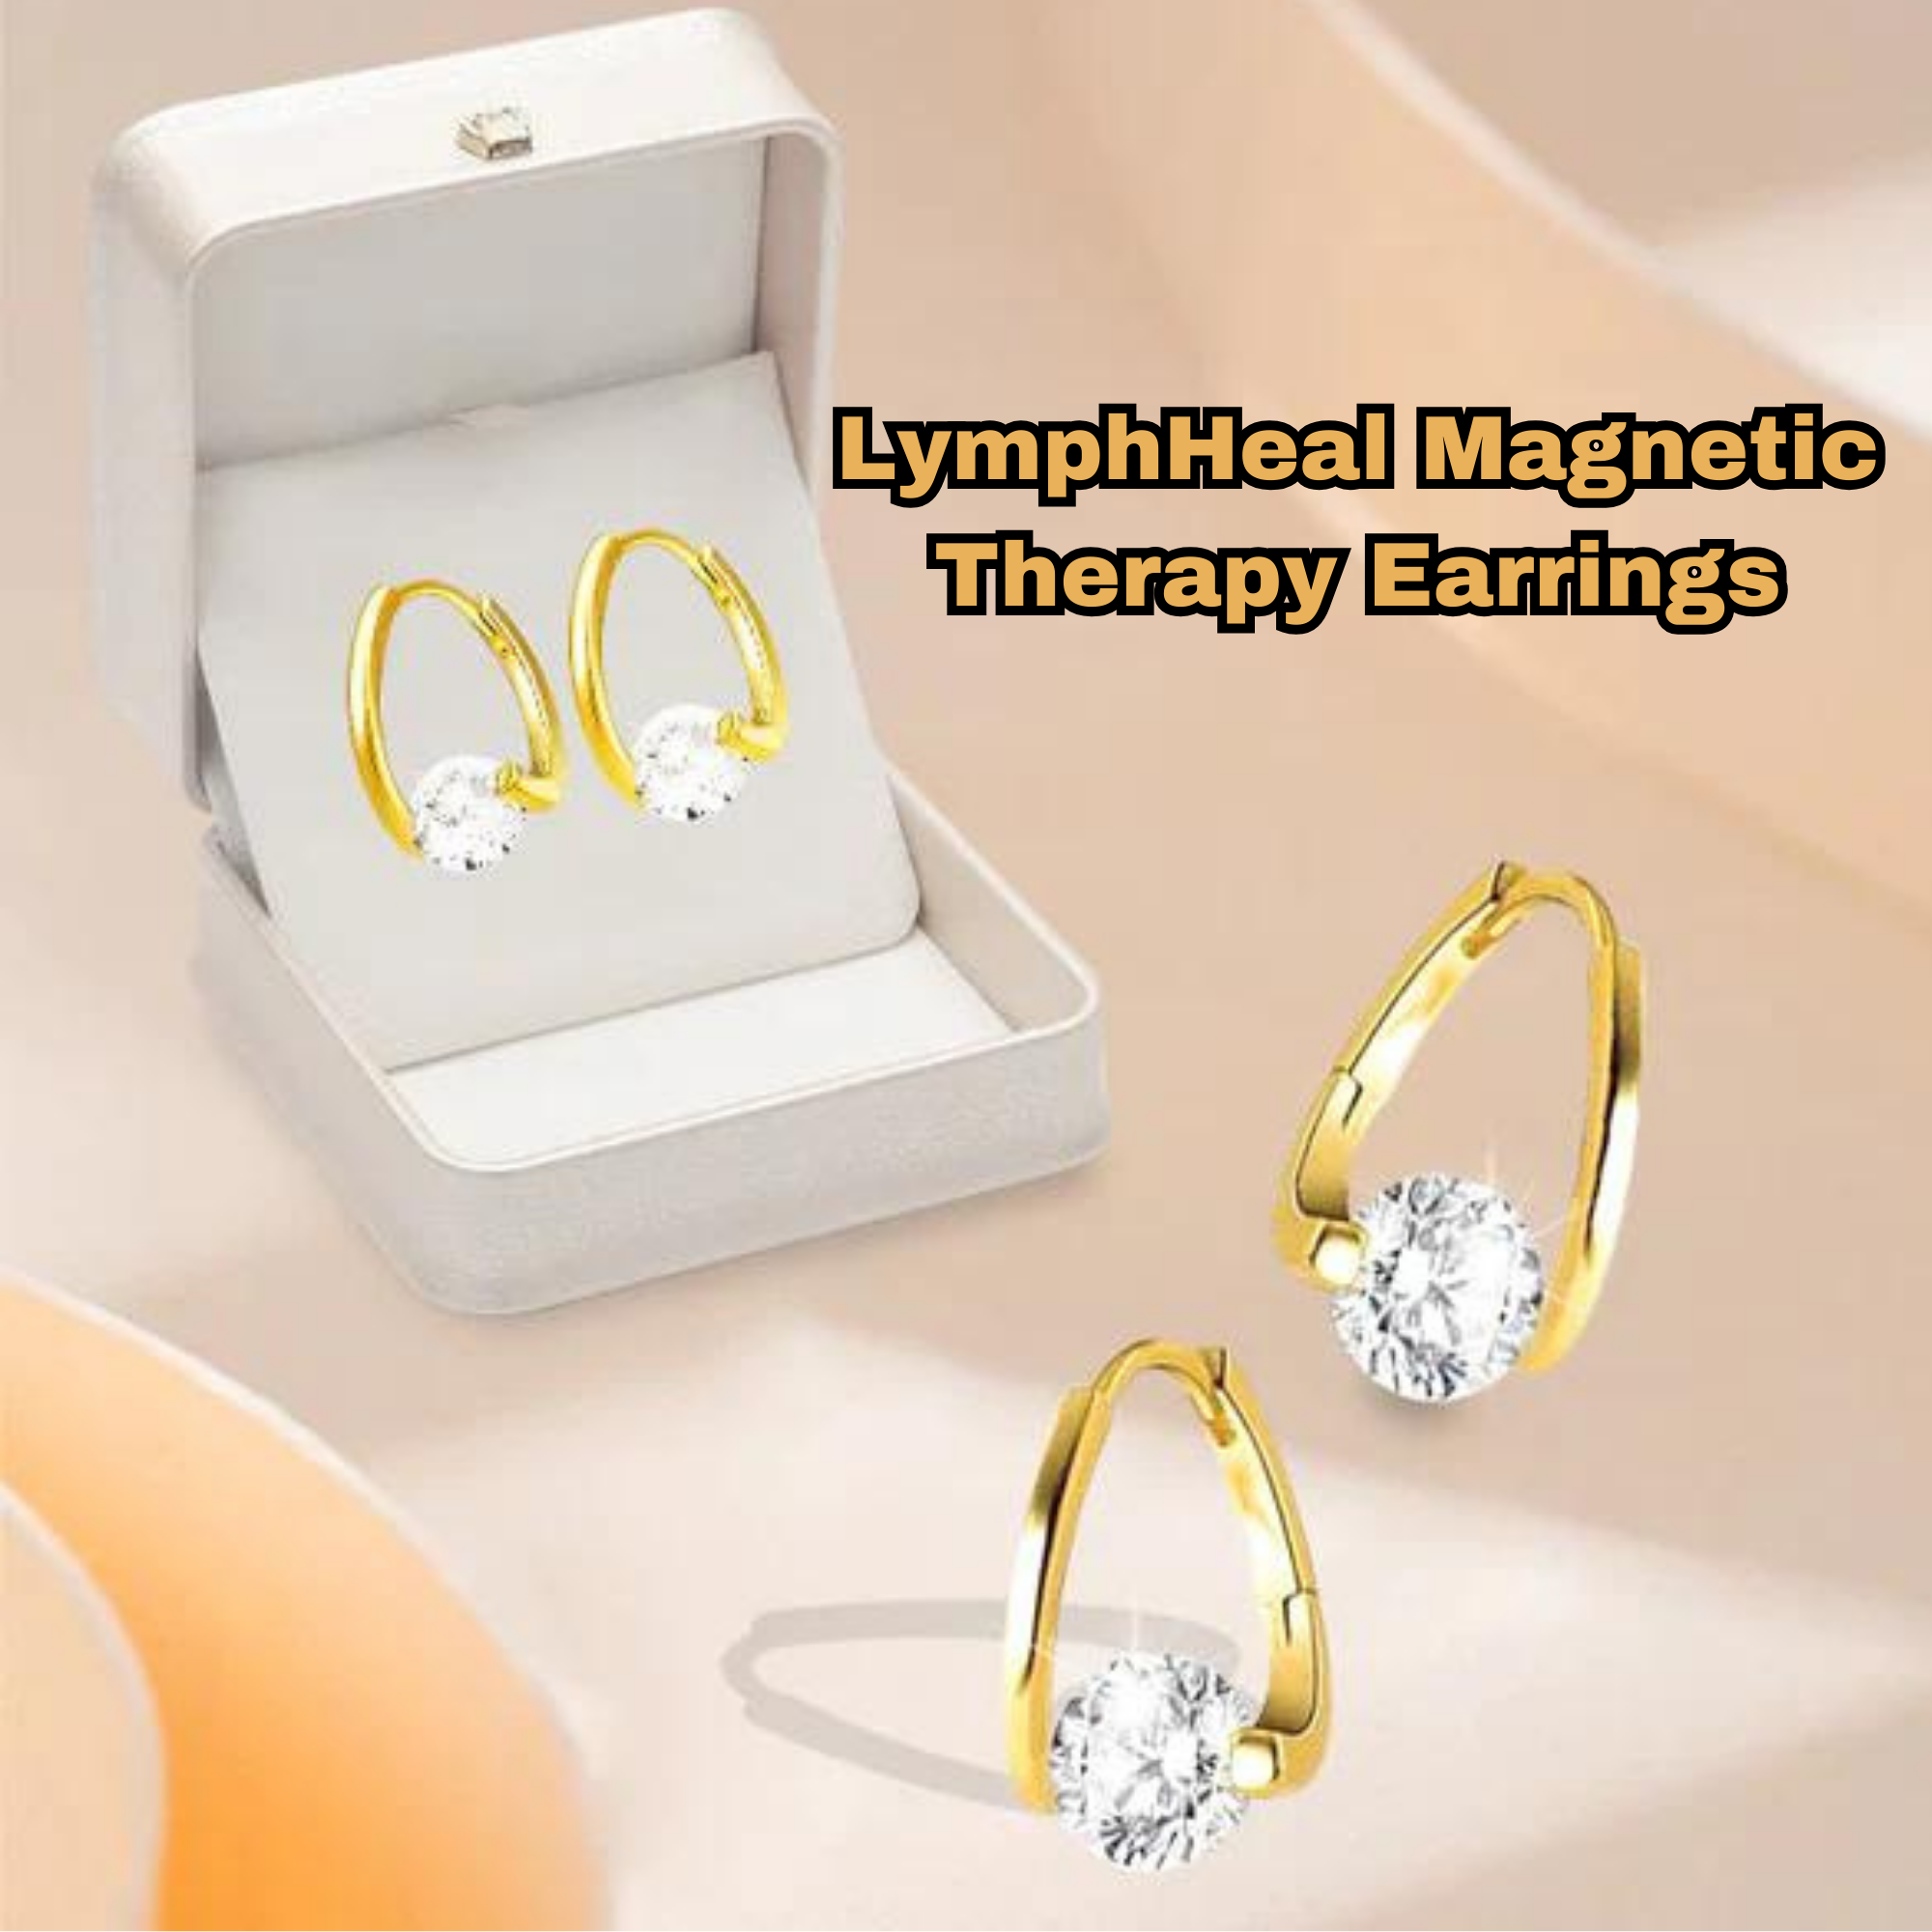 LymphHeal Magnetic Therapy Earrings